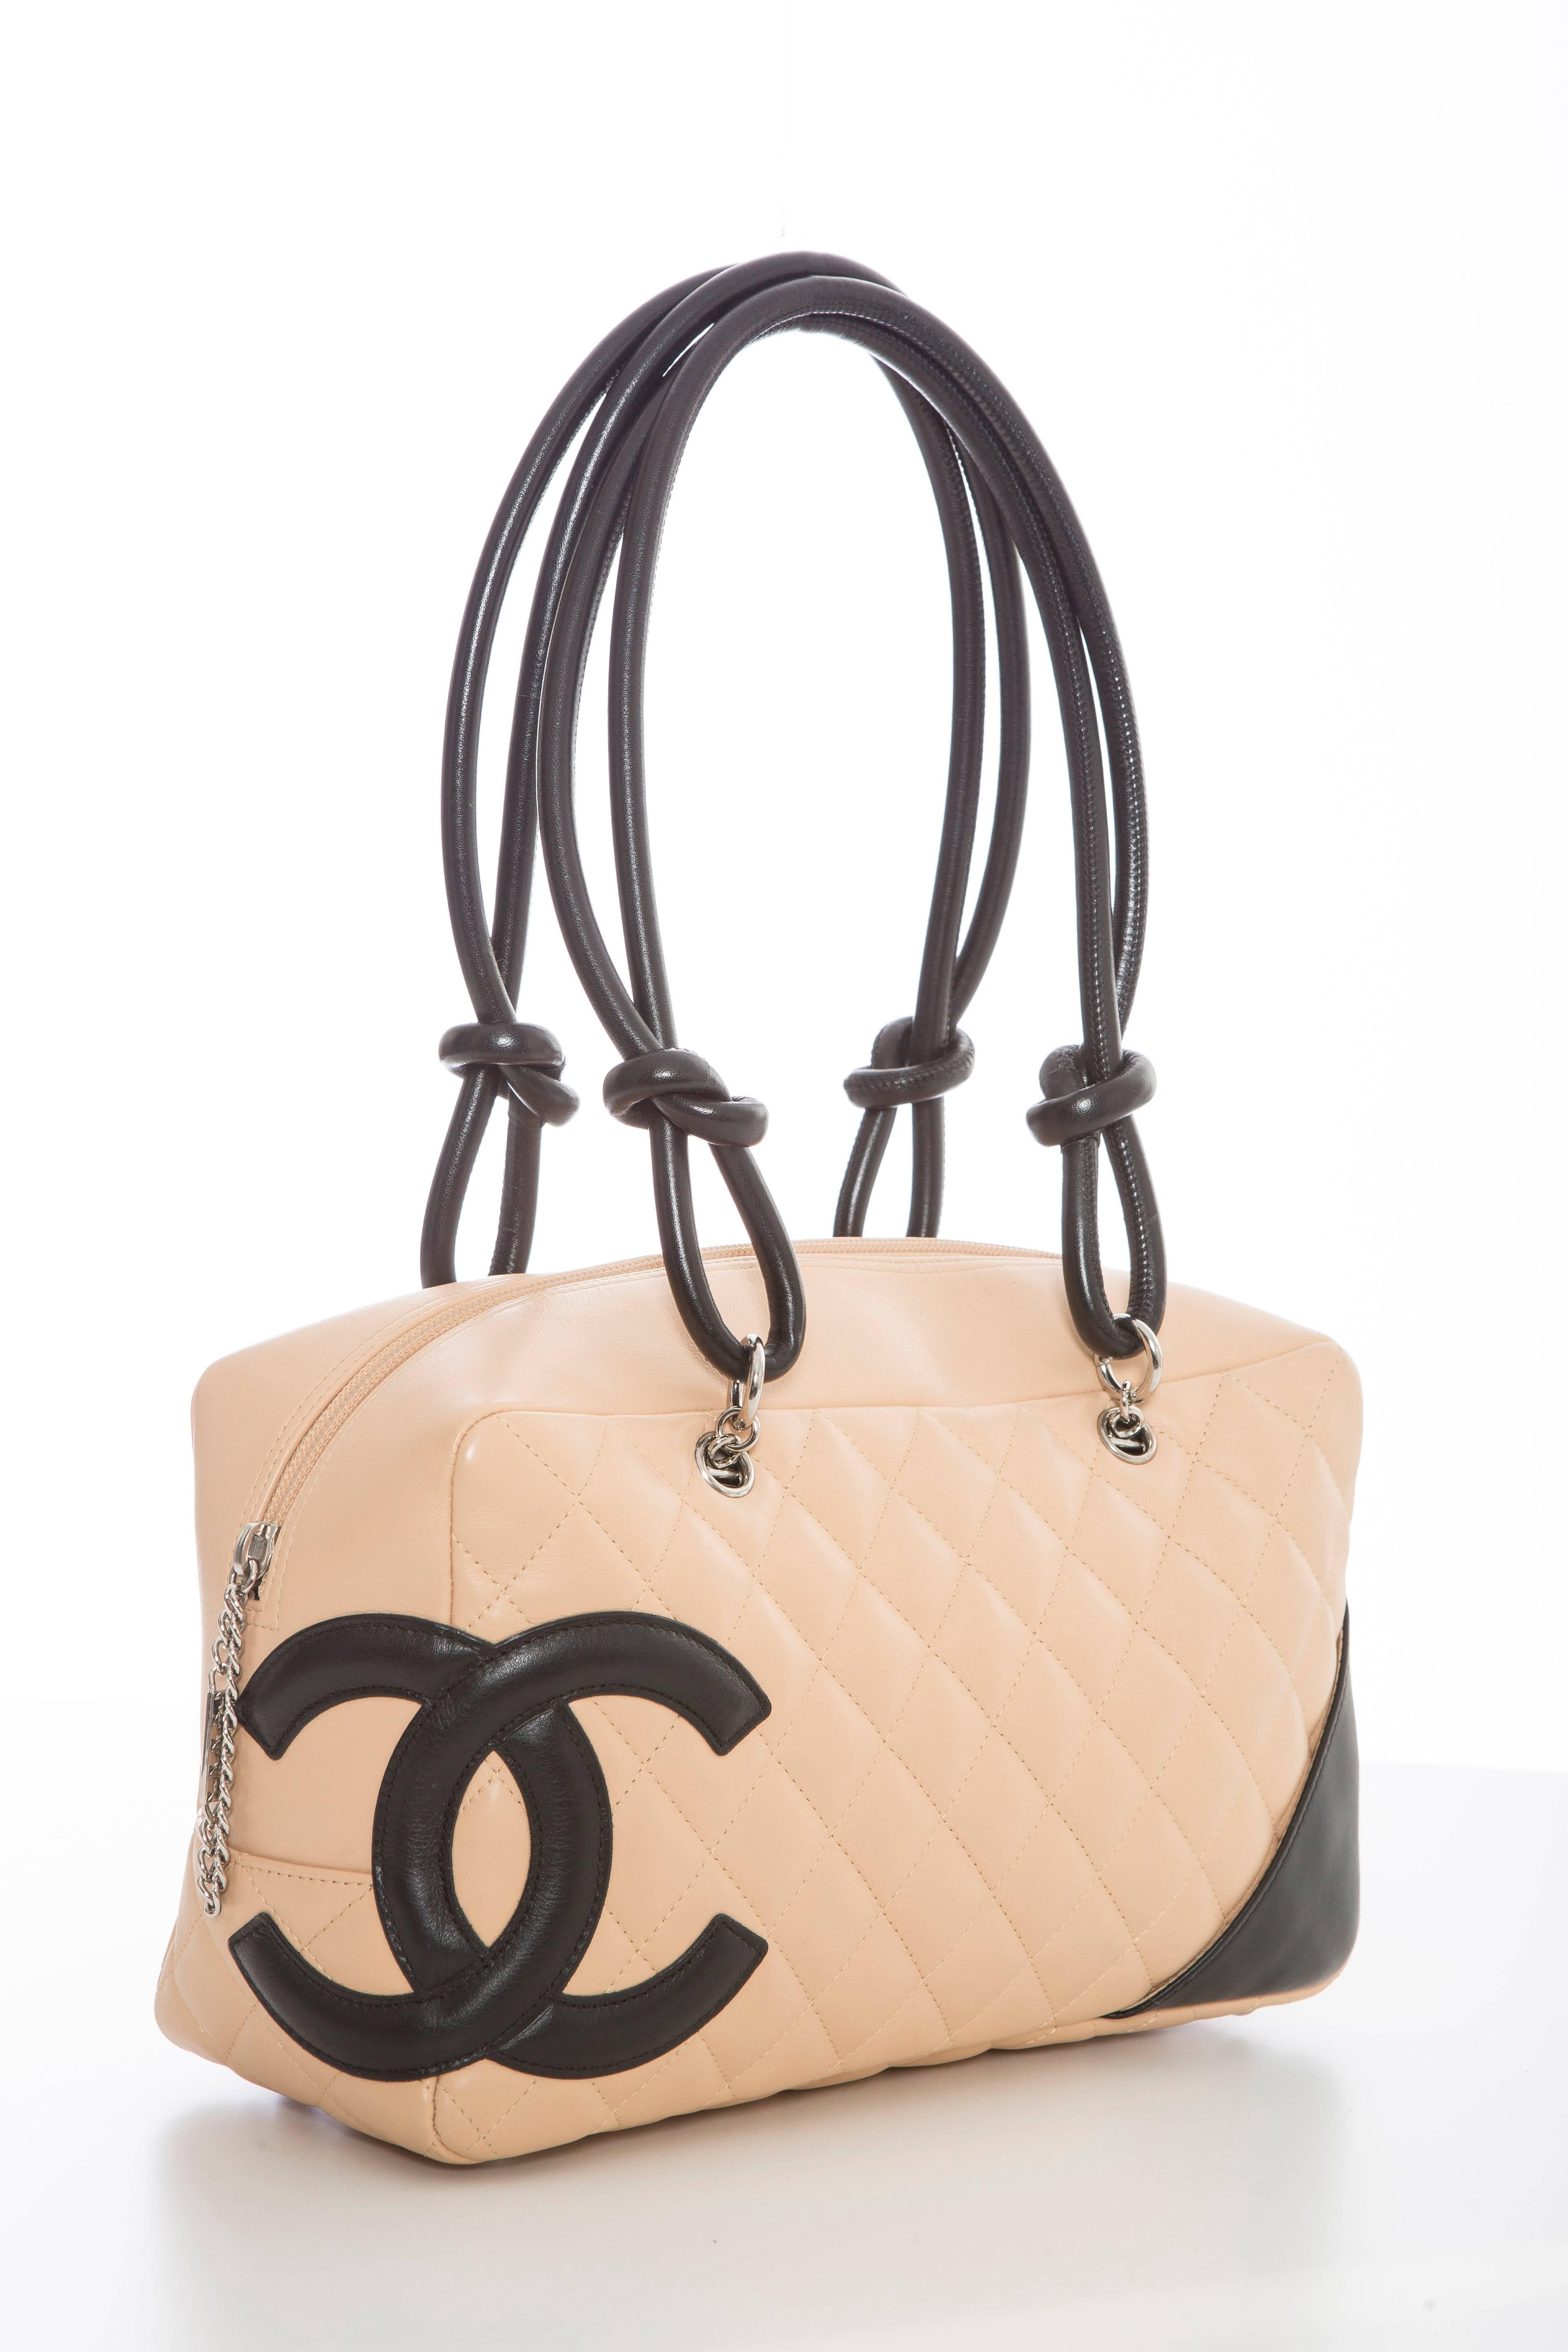 Chanel Ligne Cambon Bowler Bag, circa 2005, quilted leather with silver-tone hardware, tonal stitching throughout, dual rolled handles featuring knot accent, stitched CC logo at front face, rear face slit pocket, black logo printed woven lining,